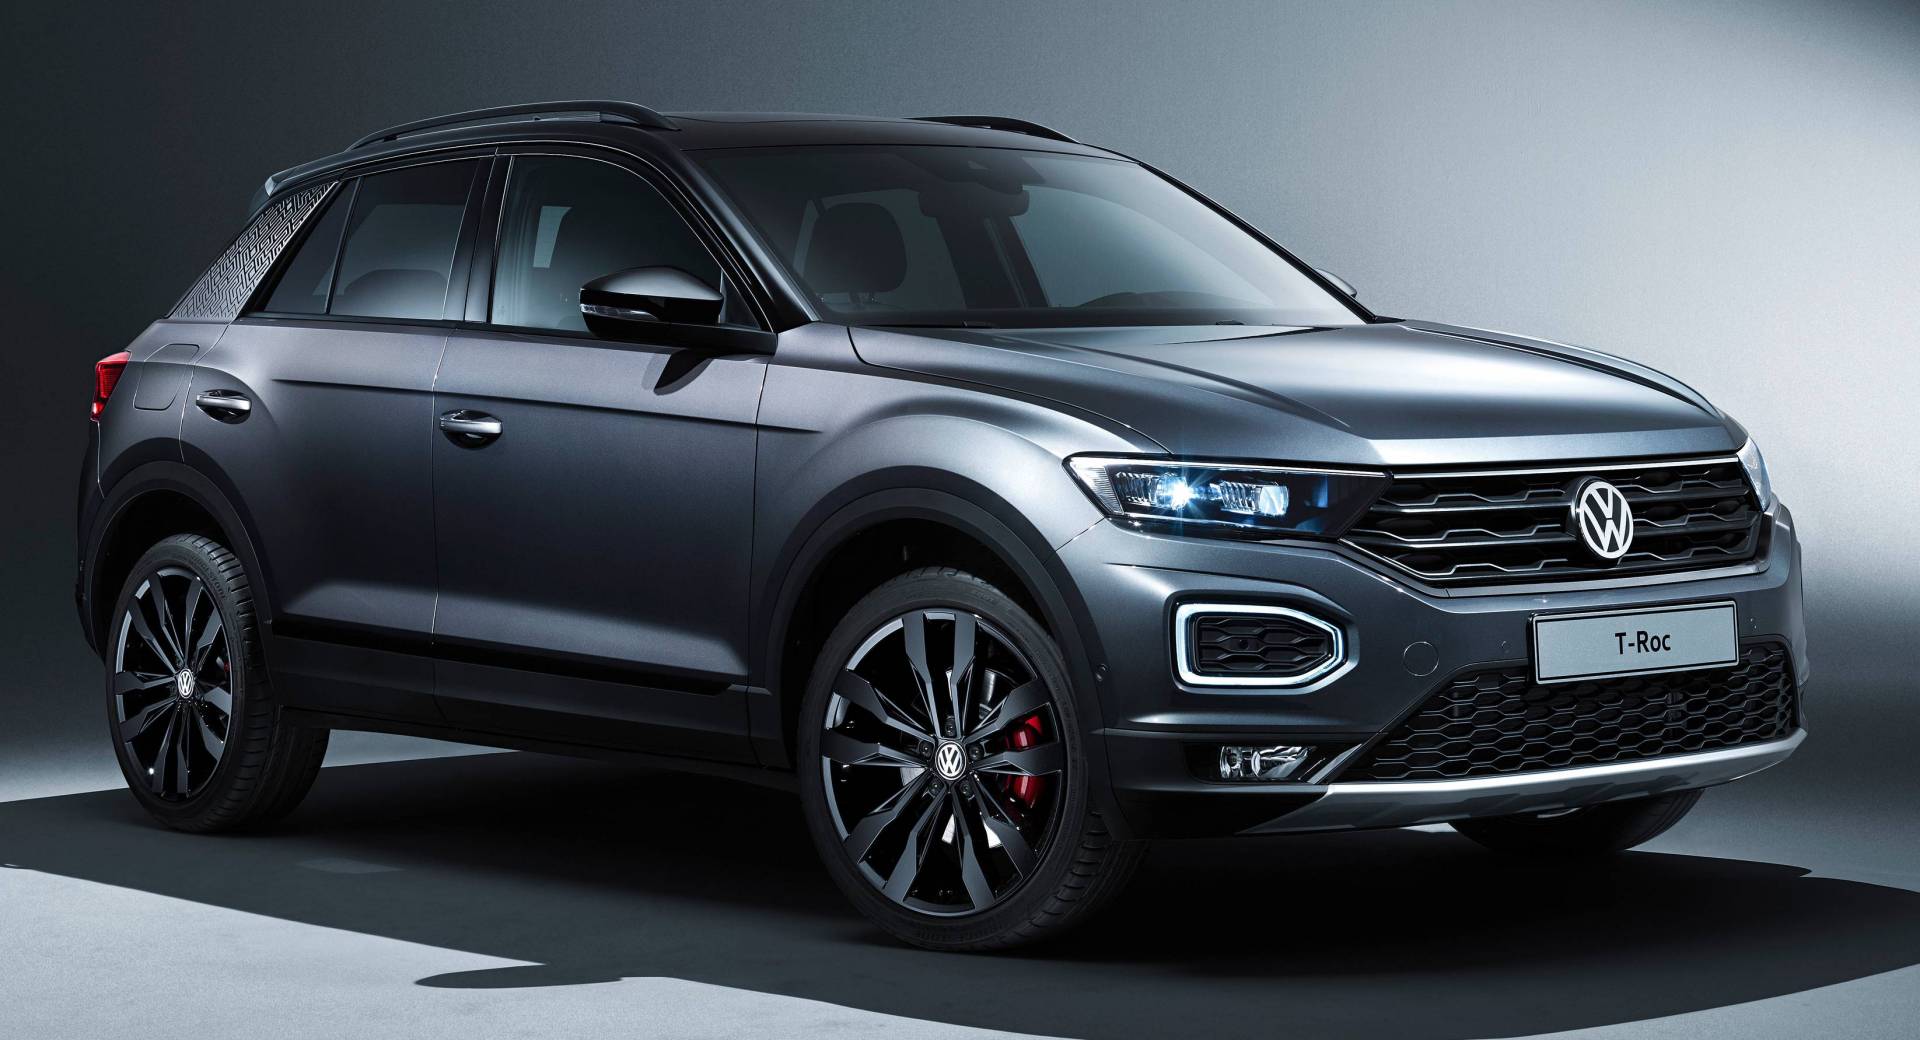 https://www.carscoops.com/wp-content/uploads/2019/09/ed7288ae-2020-vw-t-roc-with-black-style-design-package-0.jpg